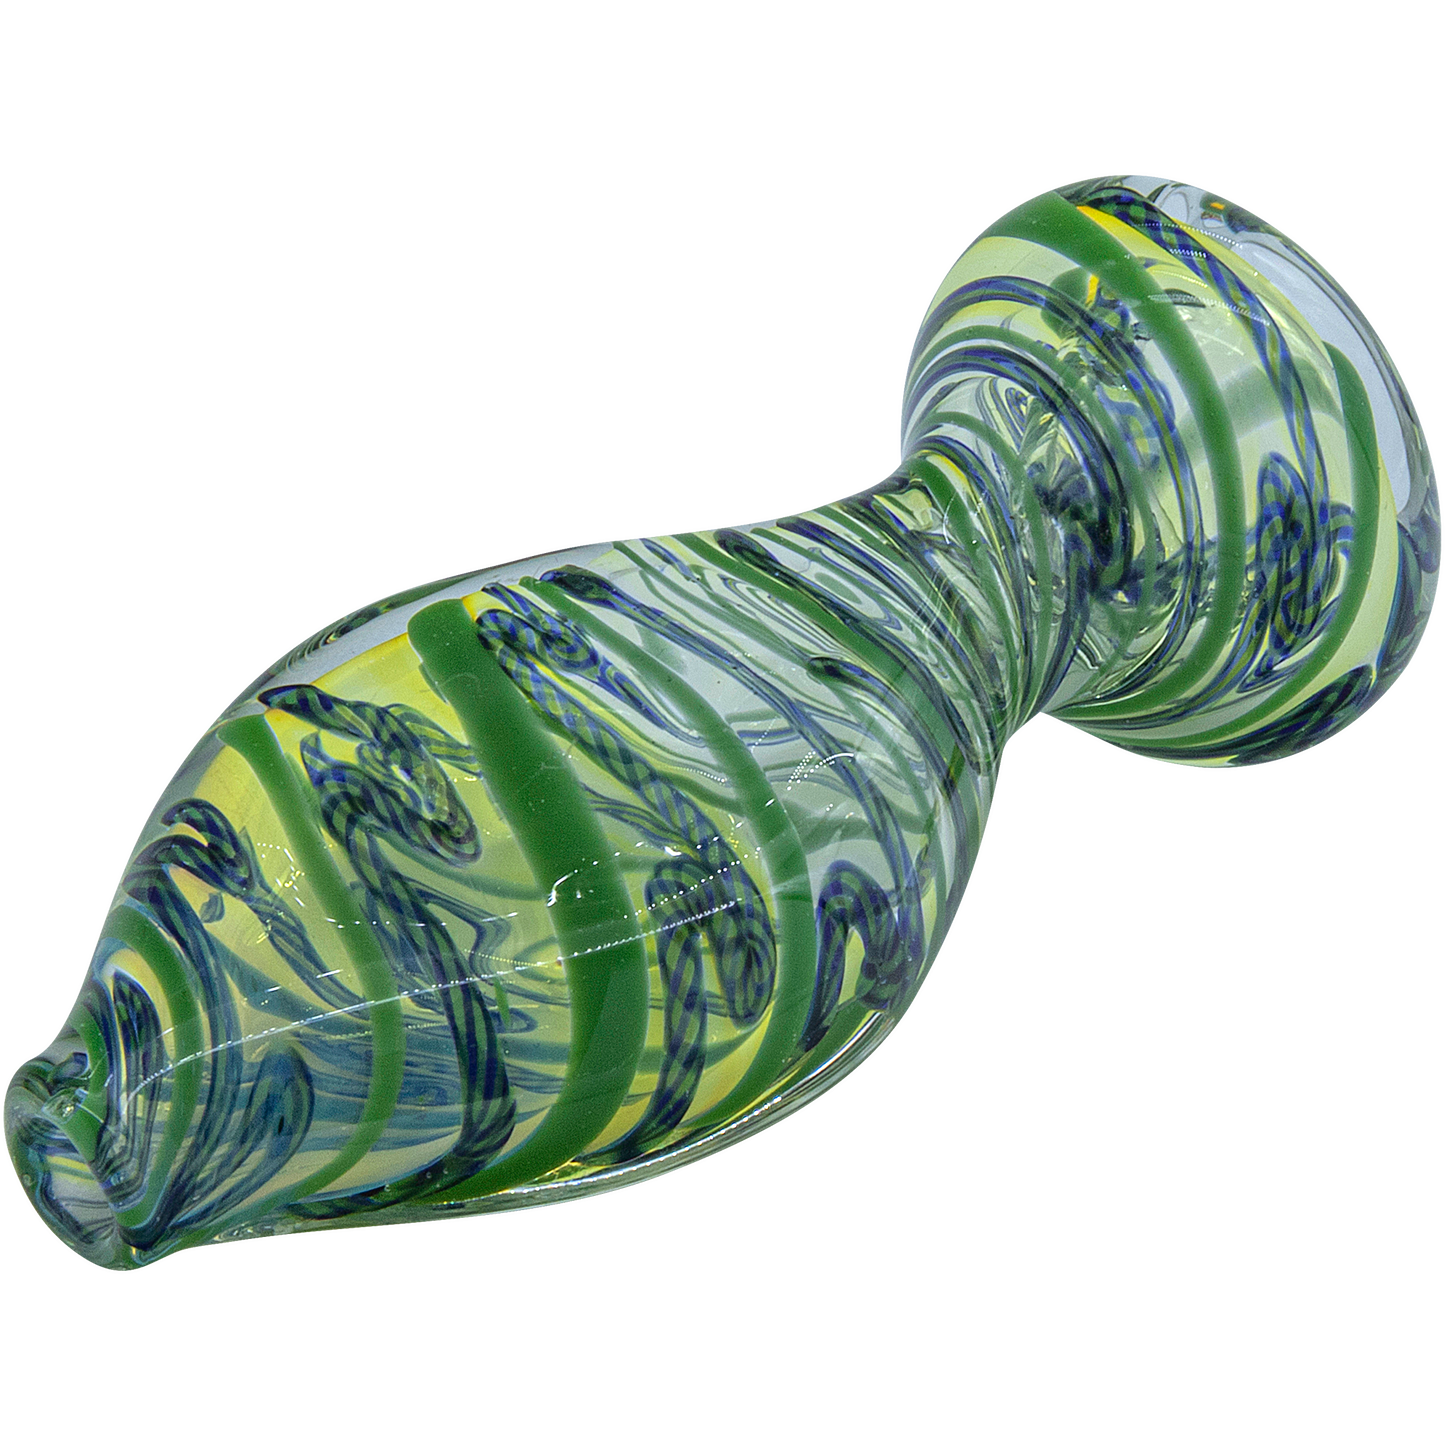 The "Flat Belly" Inside-Out Chillum